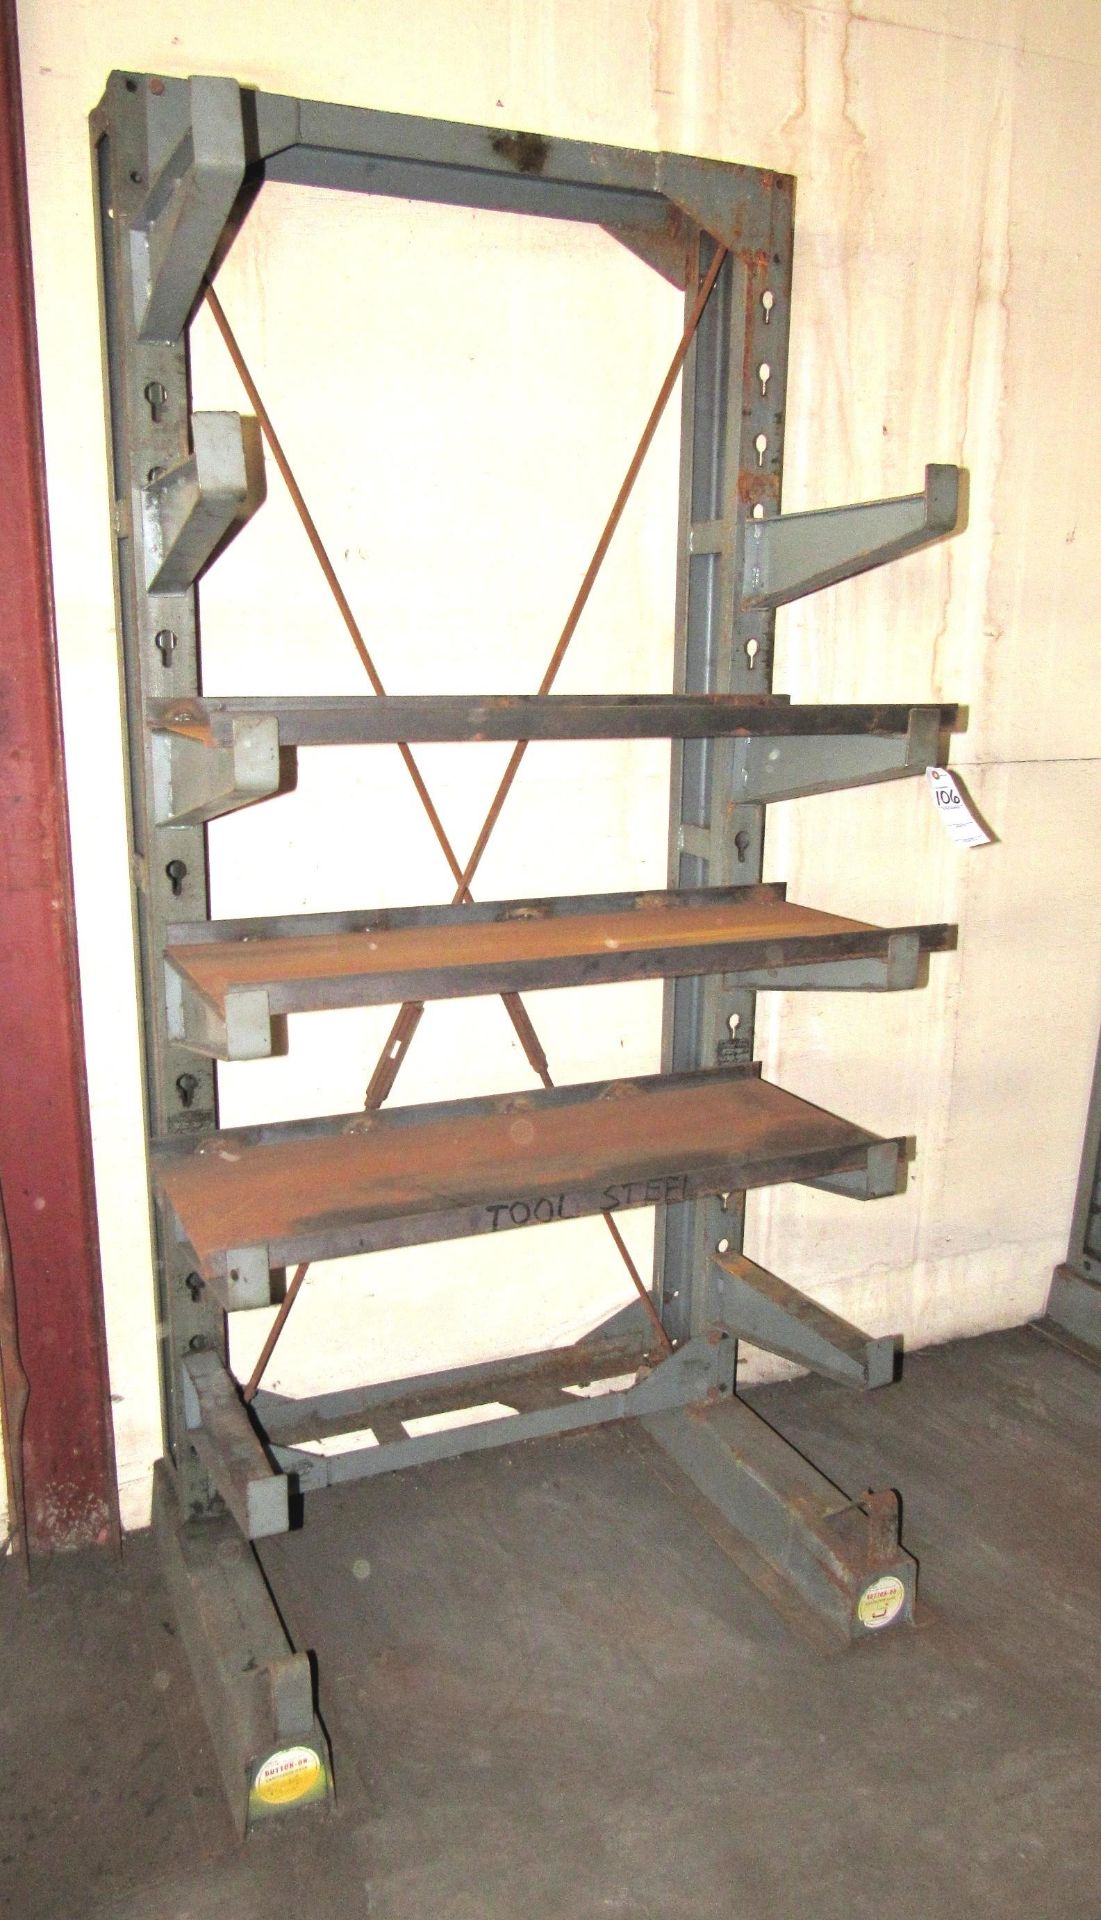 Jarke Button-On Cantilever Single Sided Steel Rack - 38.5" x 16" x 84"H, Adjustable 6 Arm